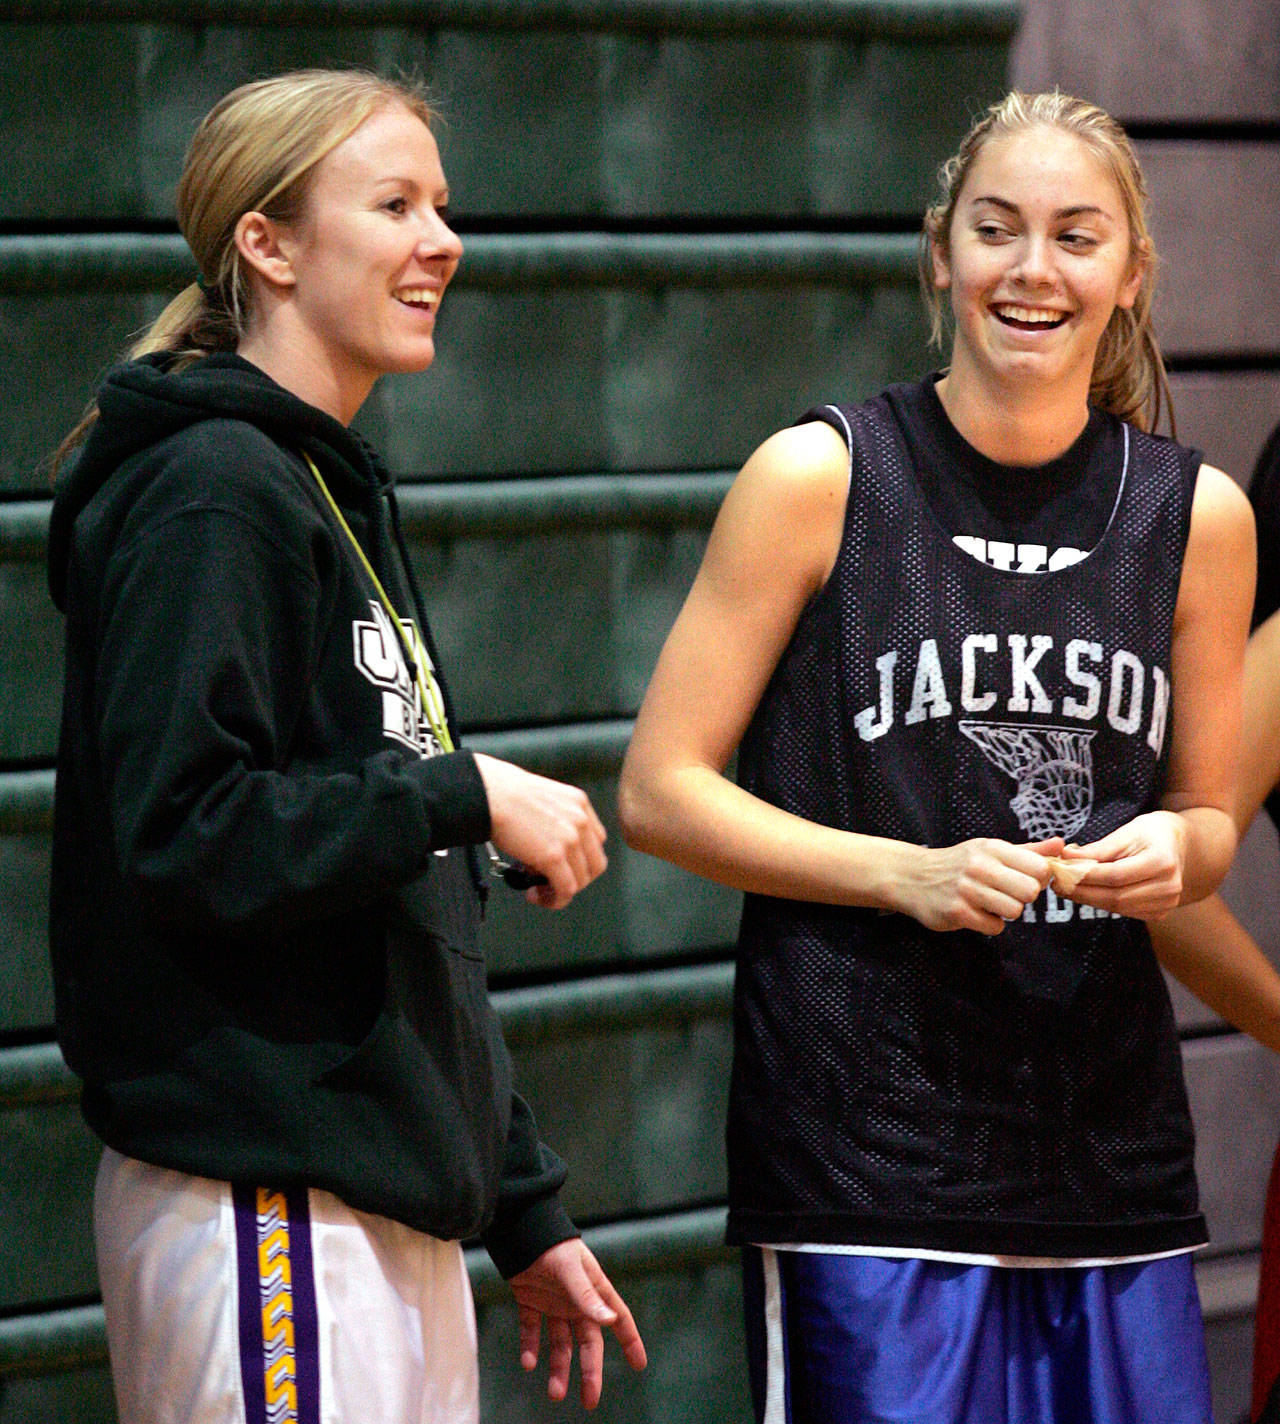 Jeannie Thompson (left) talks with Kristi Kingma during a Jackson High School practice in 2007. Thompson was hired as the head girls basketball coach at Everett this week. (Herald file)